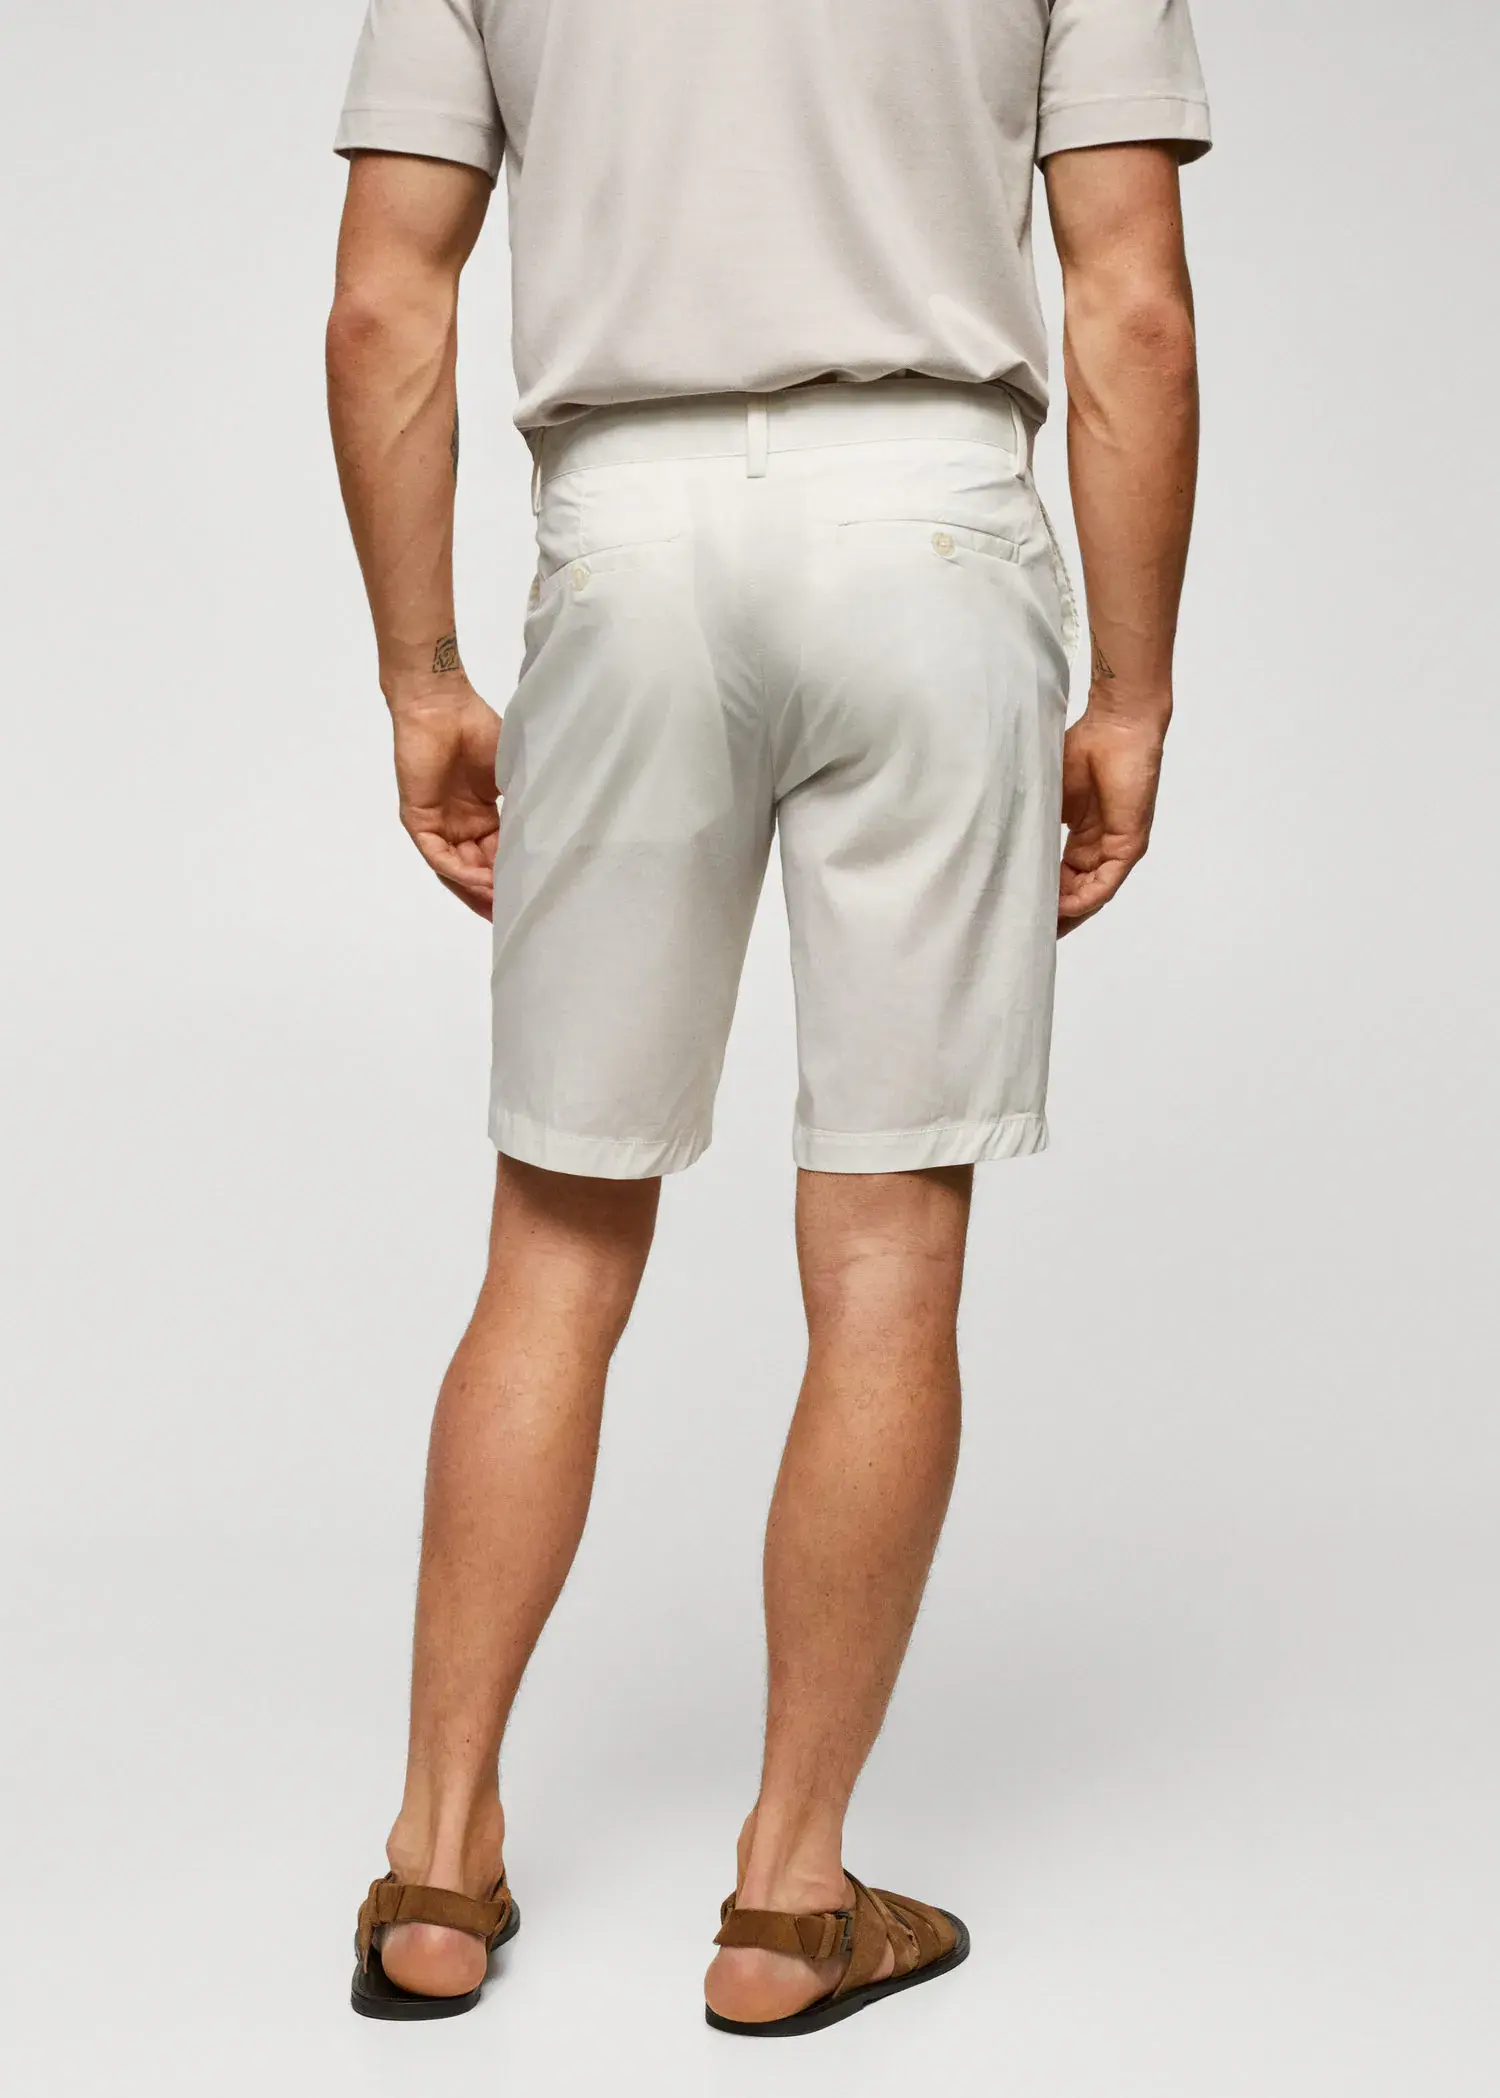 Mango Cotton pleated Bermuda shorts. a man in white shorts and a white shirt. 